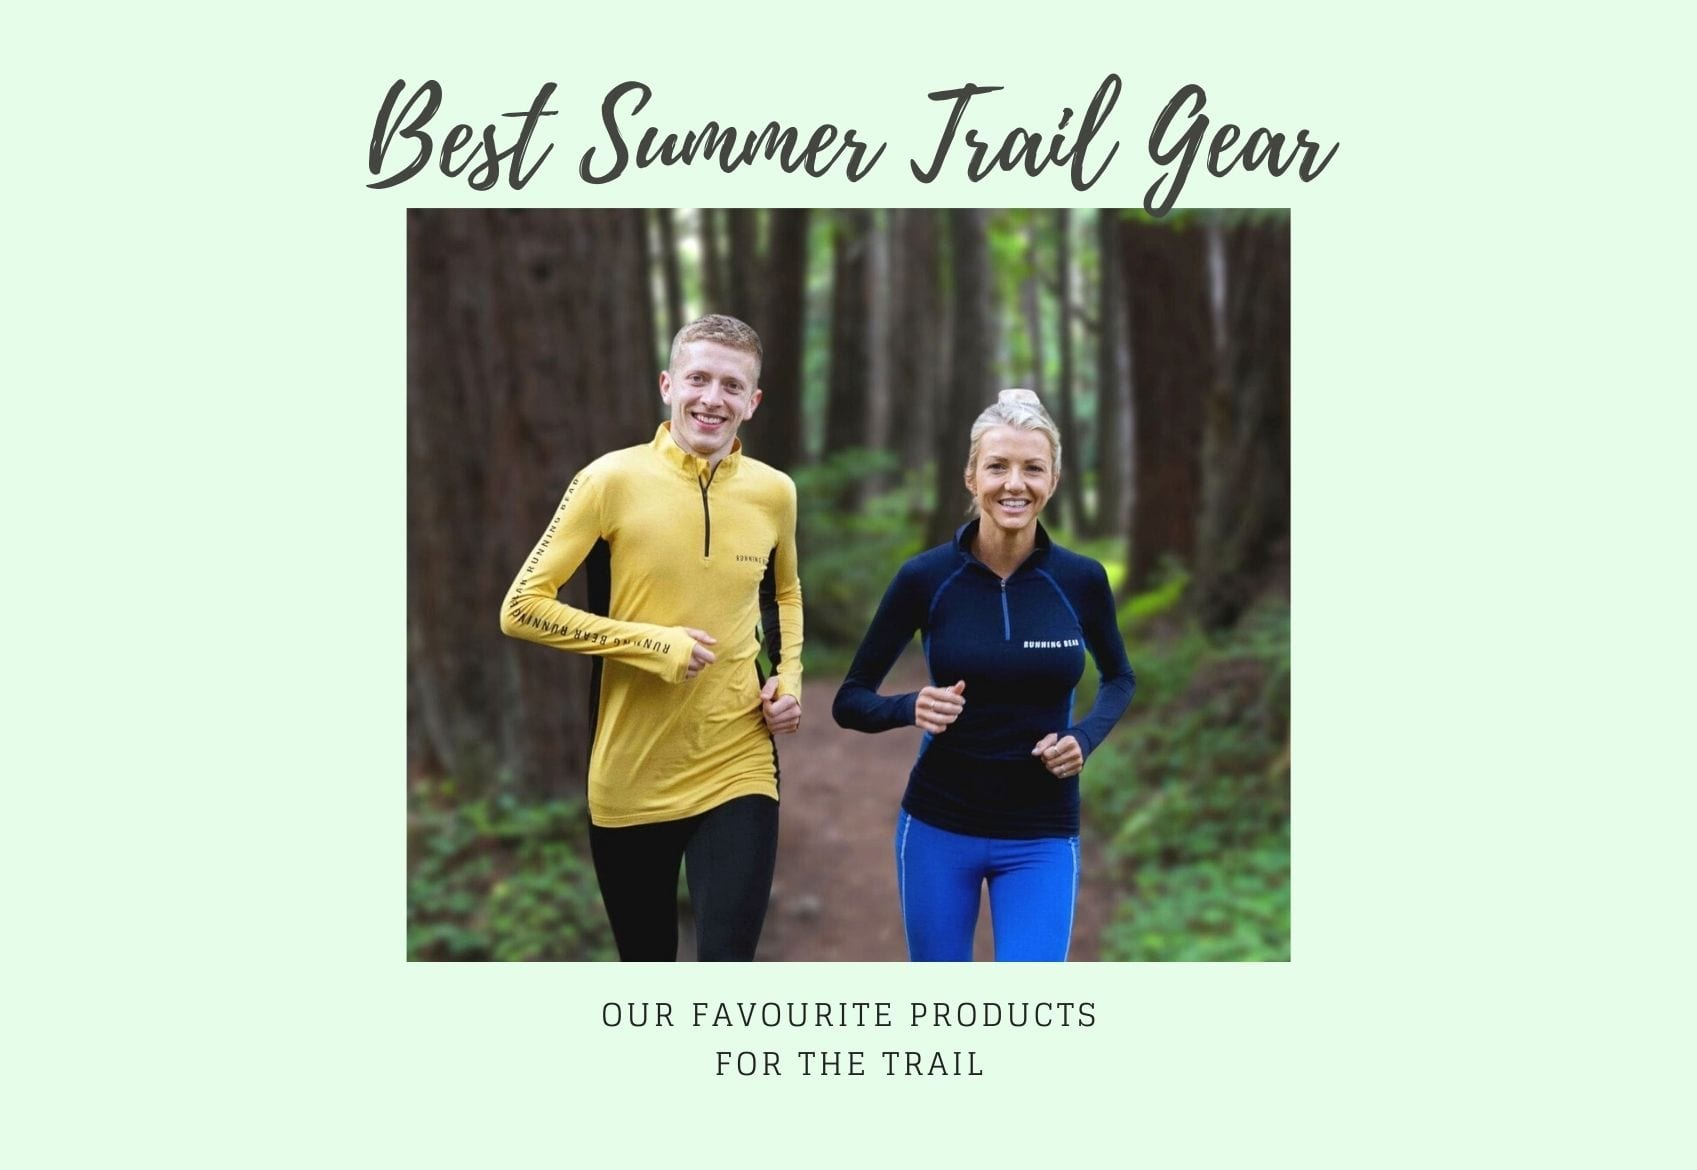 best trail gear for summer 2021 in the UK running bear trail shoes